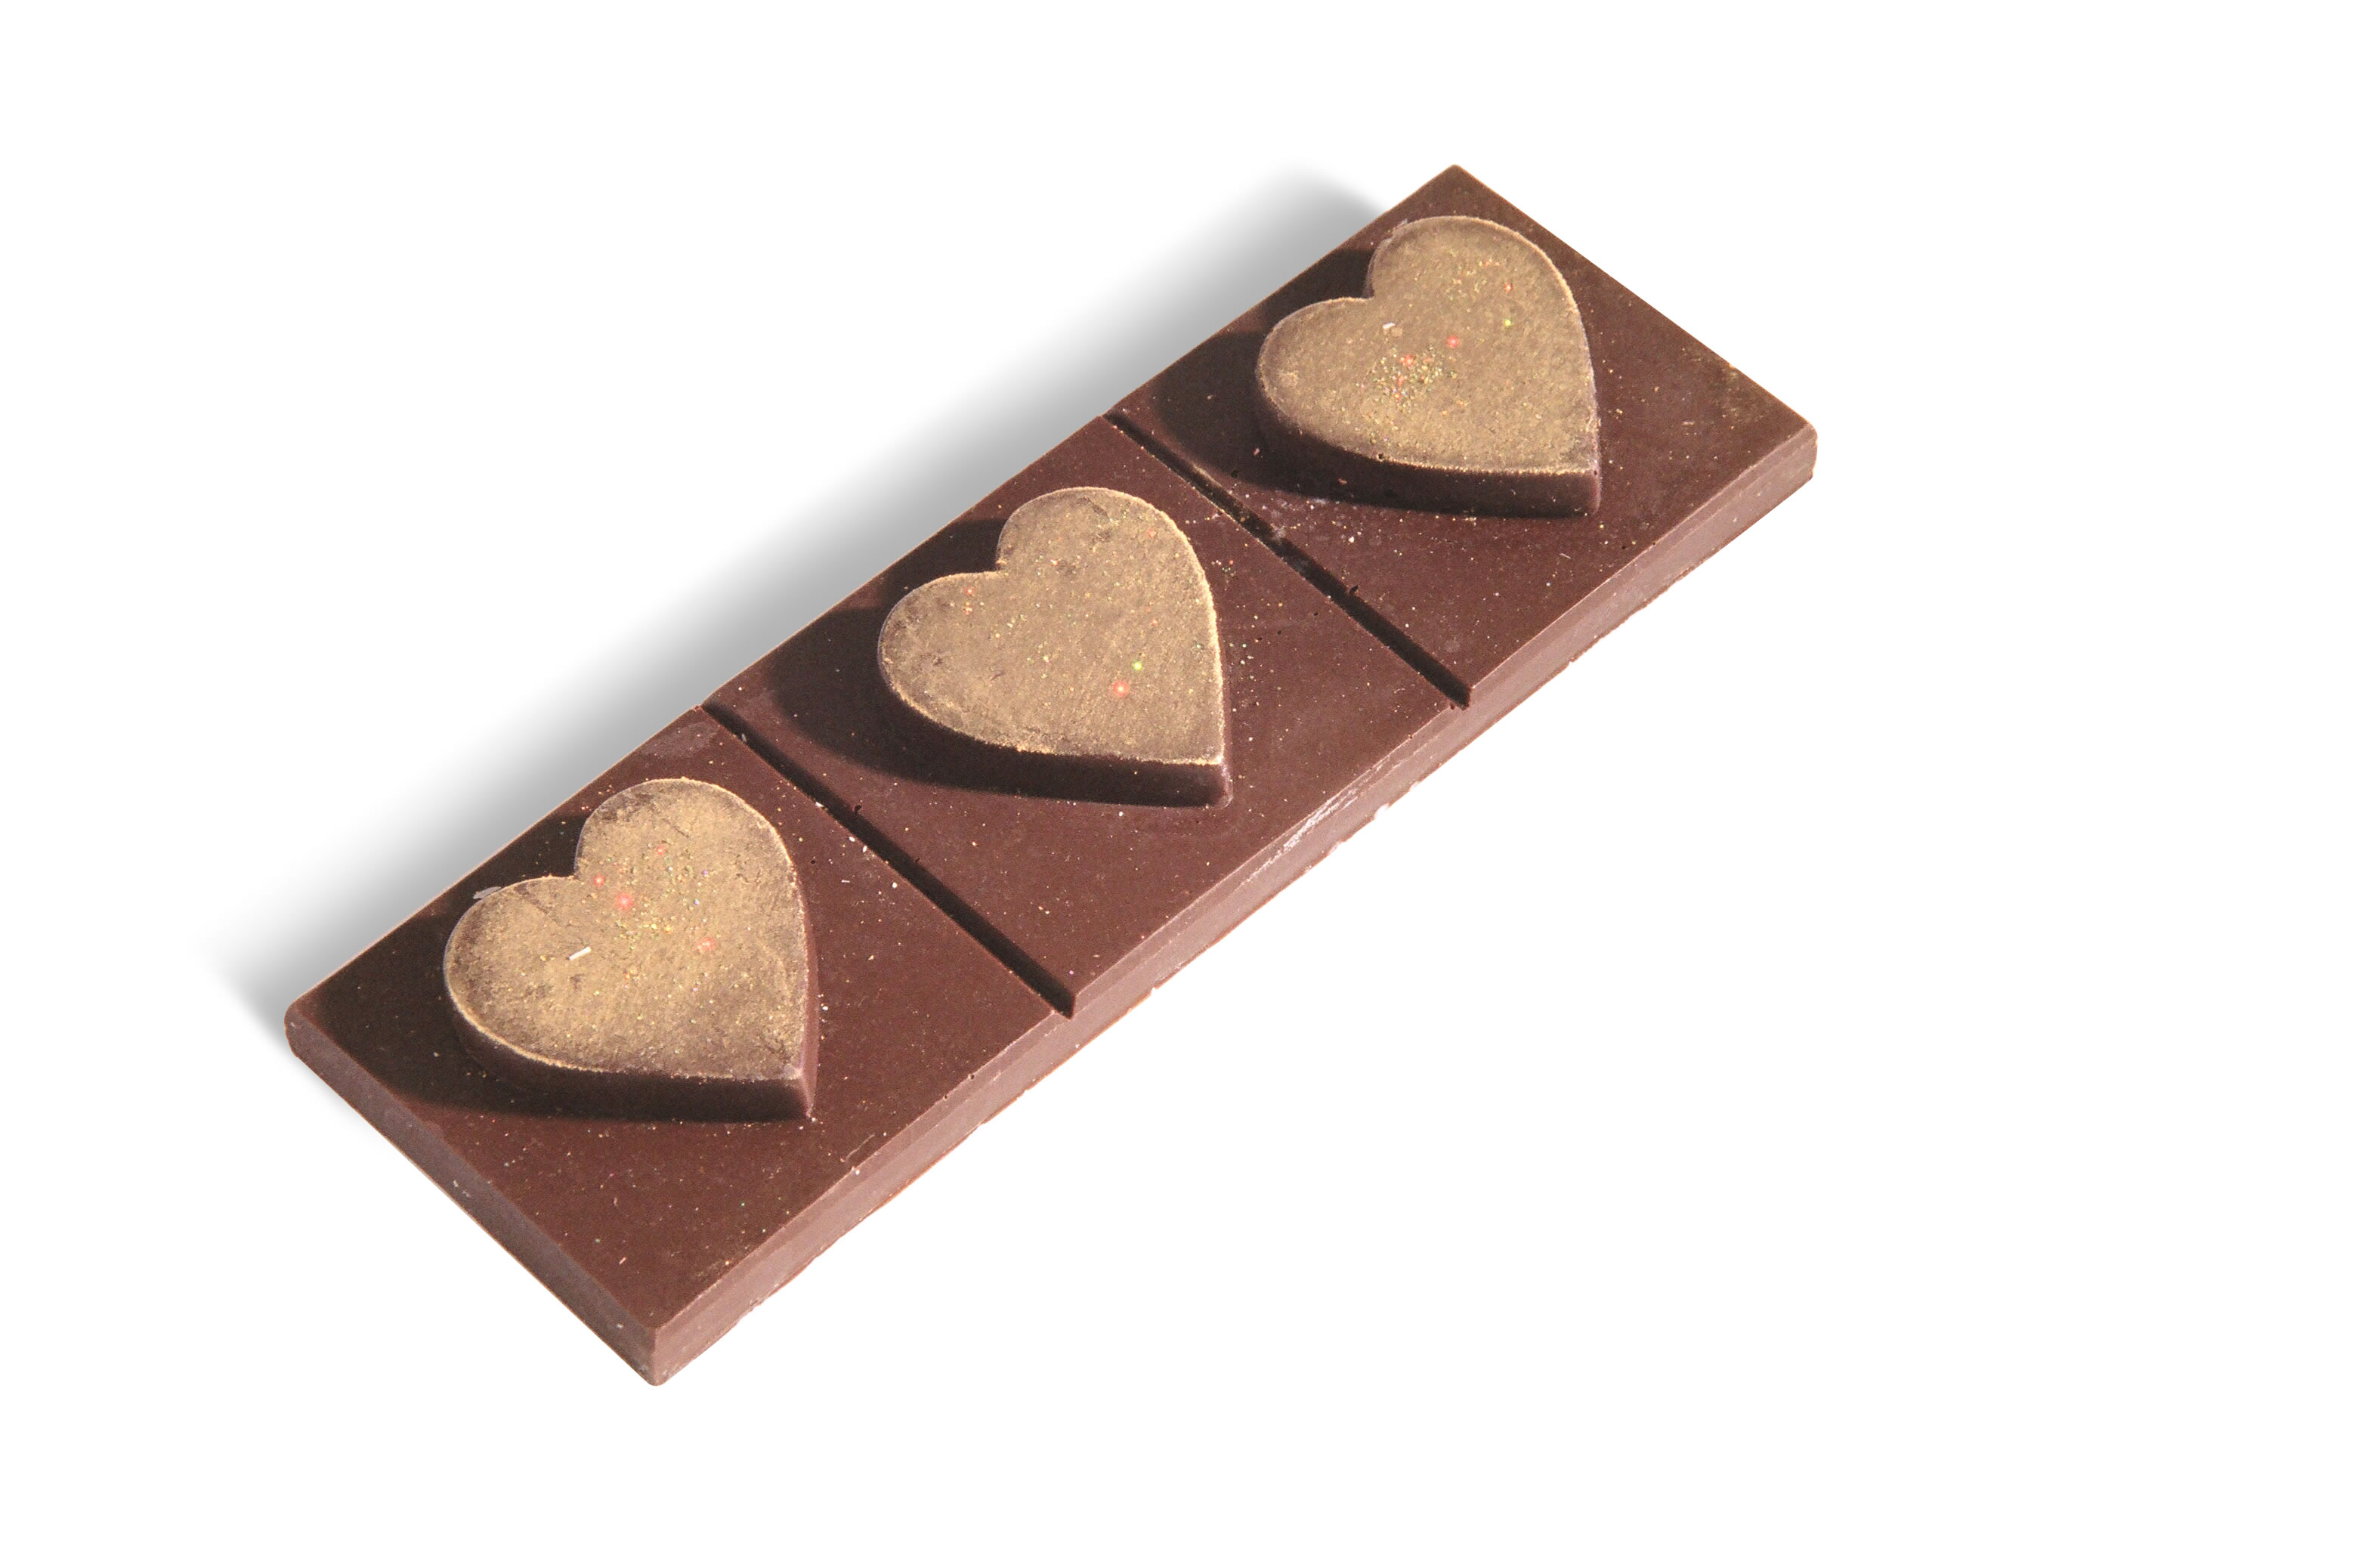 Indulge with rich belgian chocolate beautifully designed as 3 hearts.